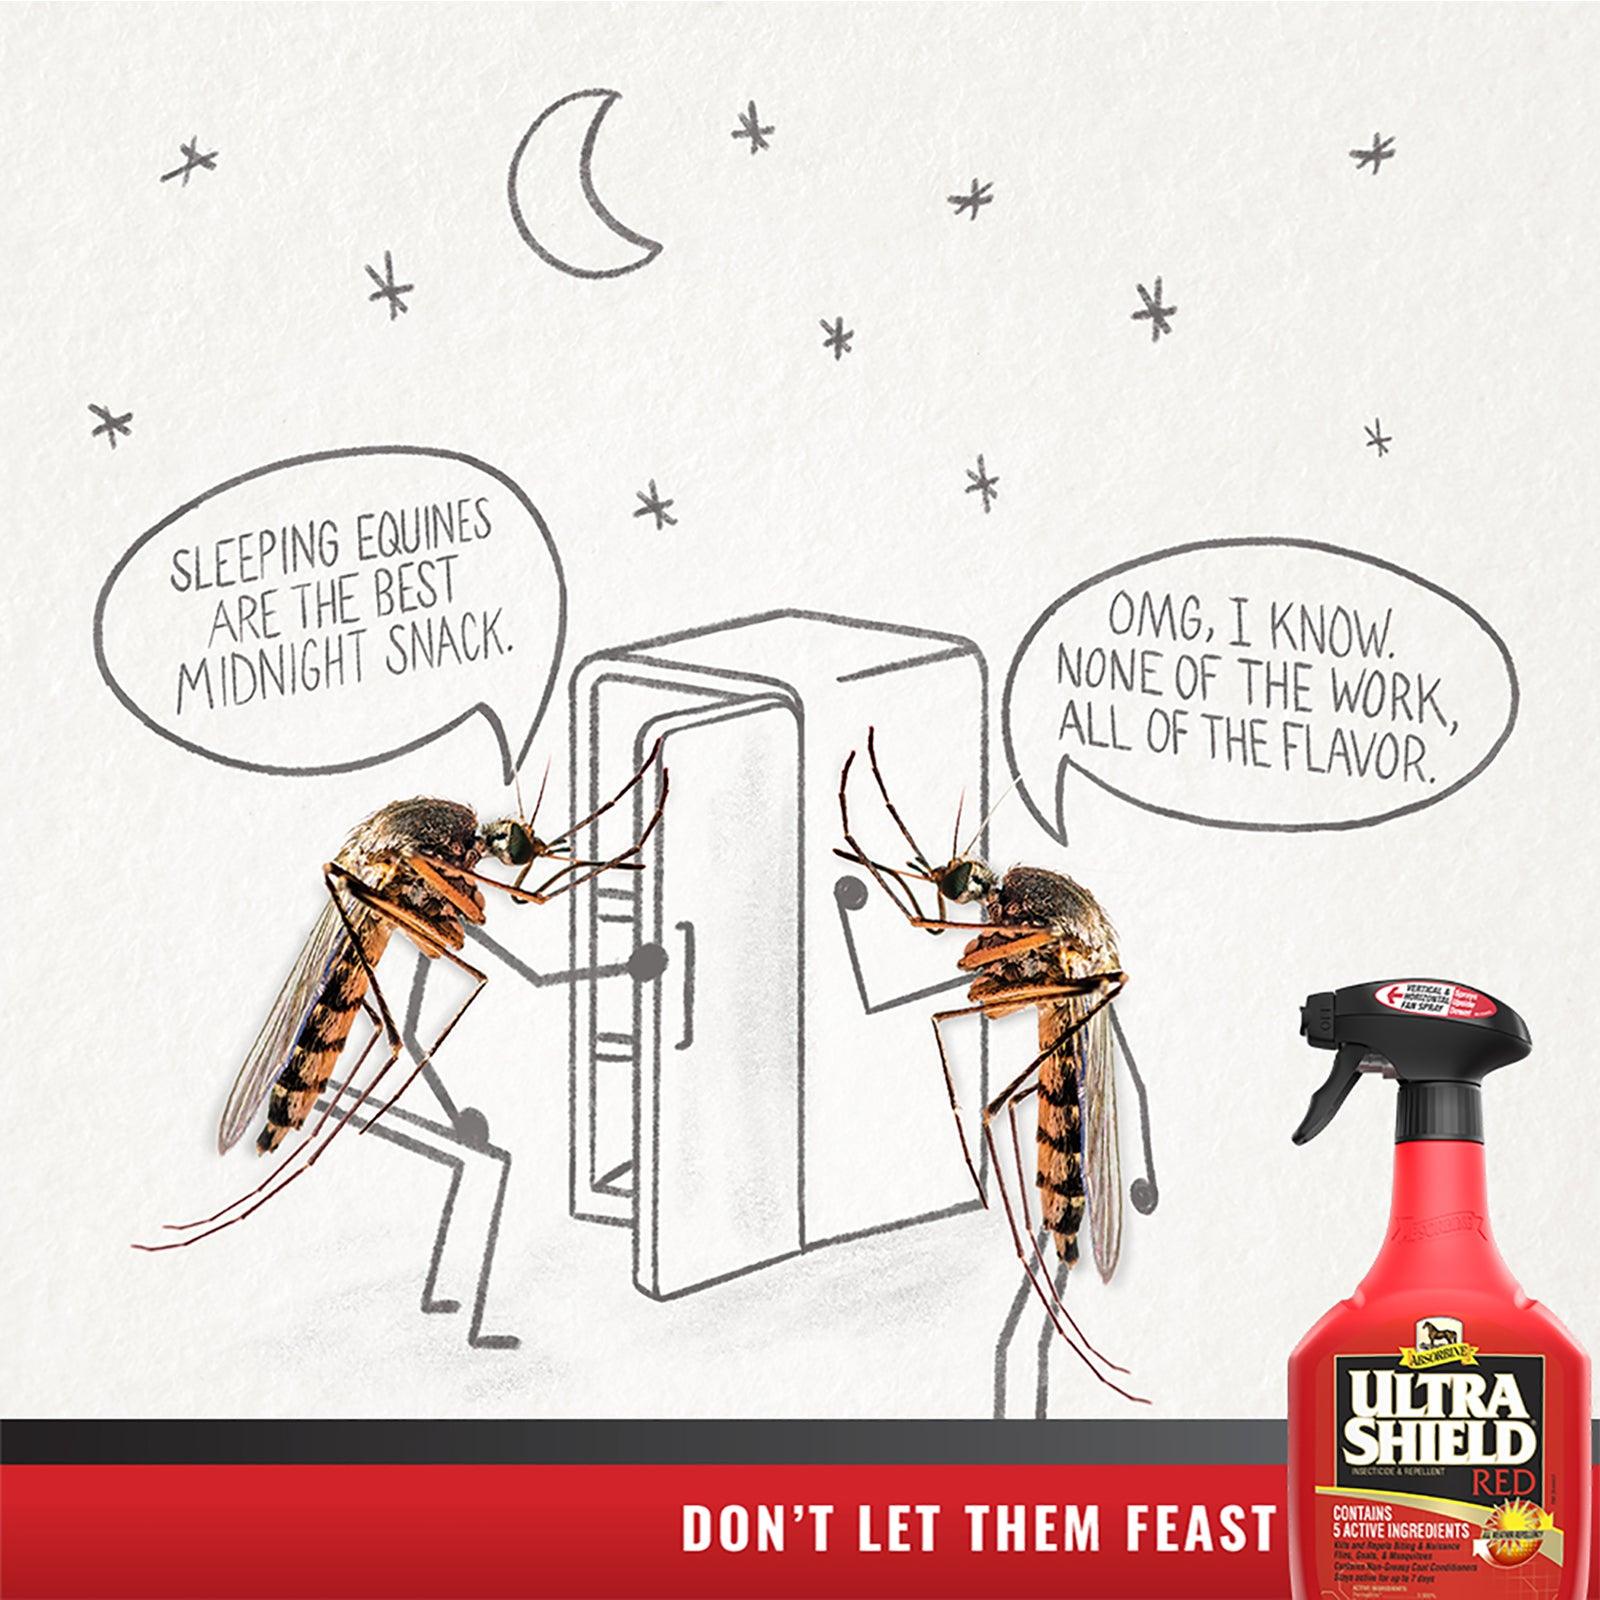 Don't let them feast! Two mosquitos opening an imaginary refrigerator on a white paper, with pencil drawn arms and legs. One tick is saying "Sleeping equines are the best midnight snack" and the other saying "OMG, I know, none of the work, all of the flavor." UltraShield Red to the rescue.